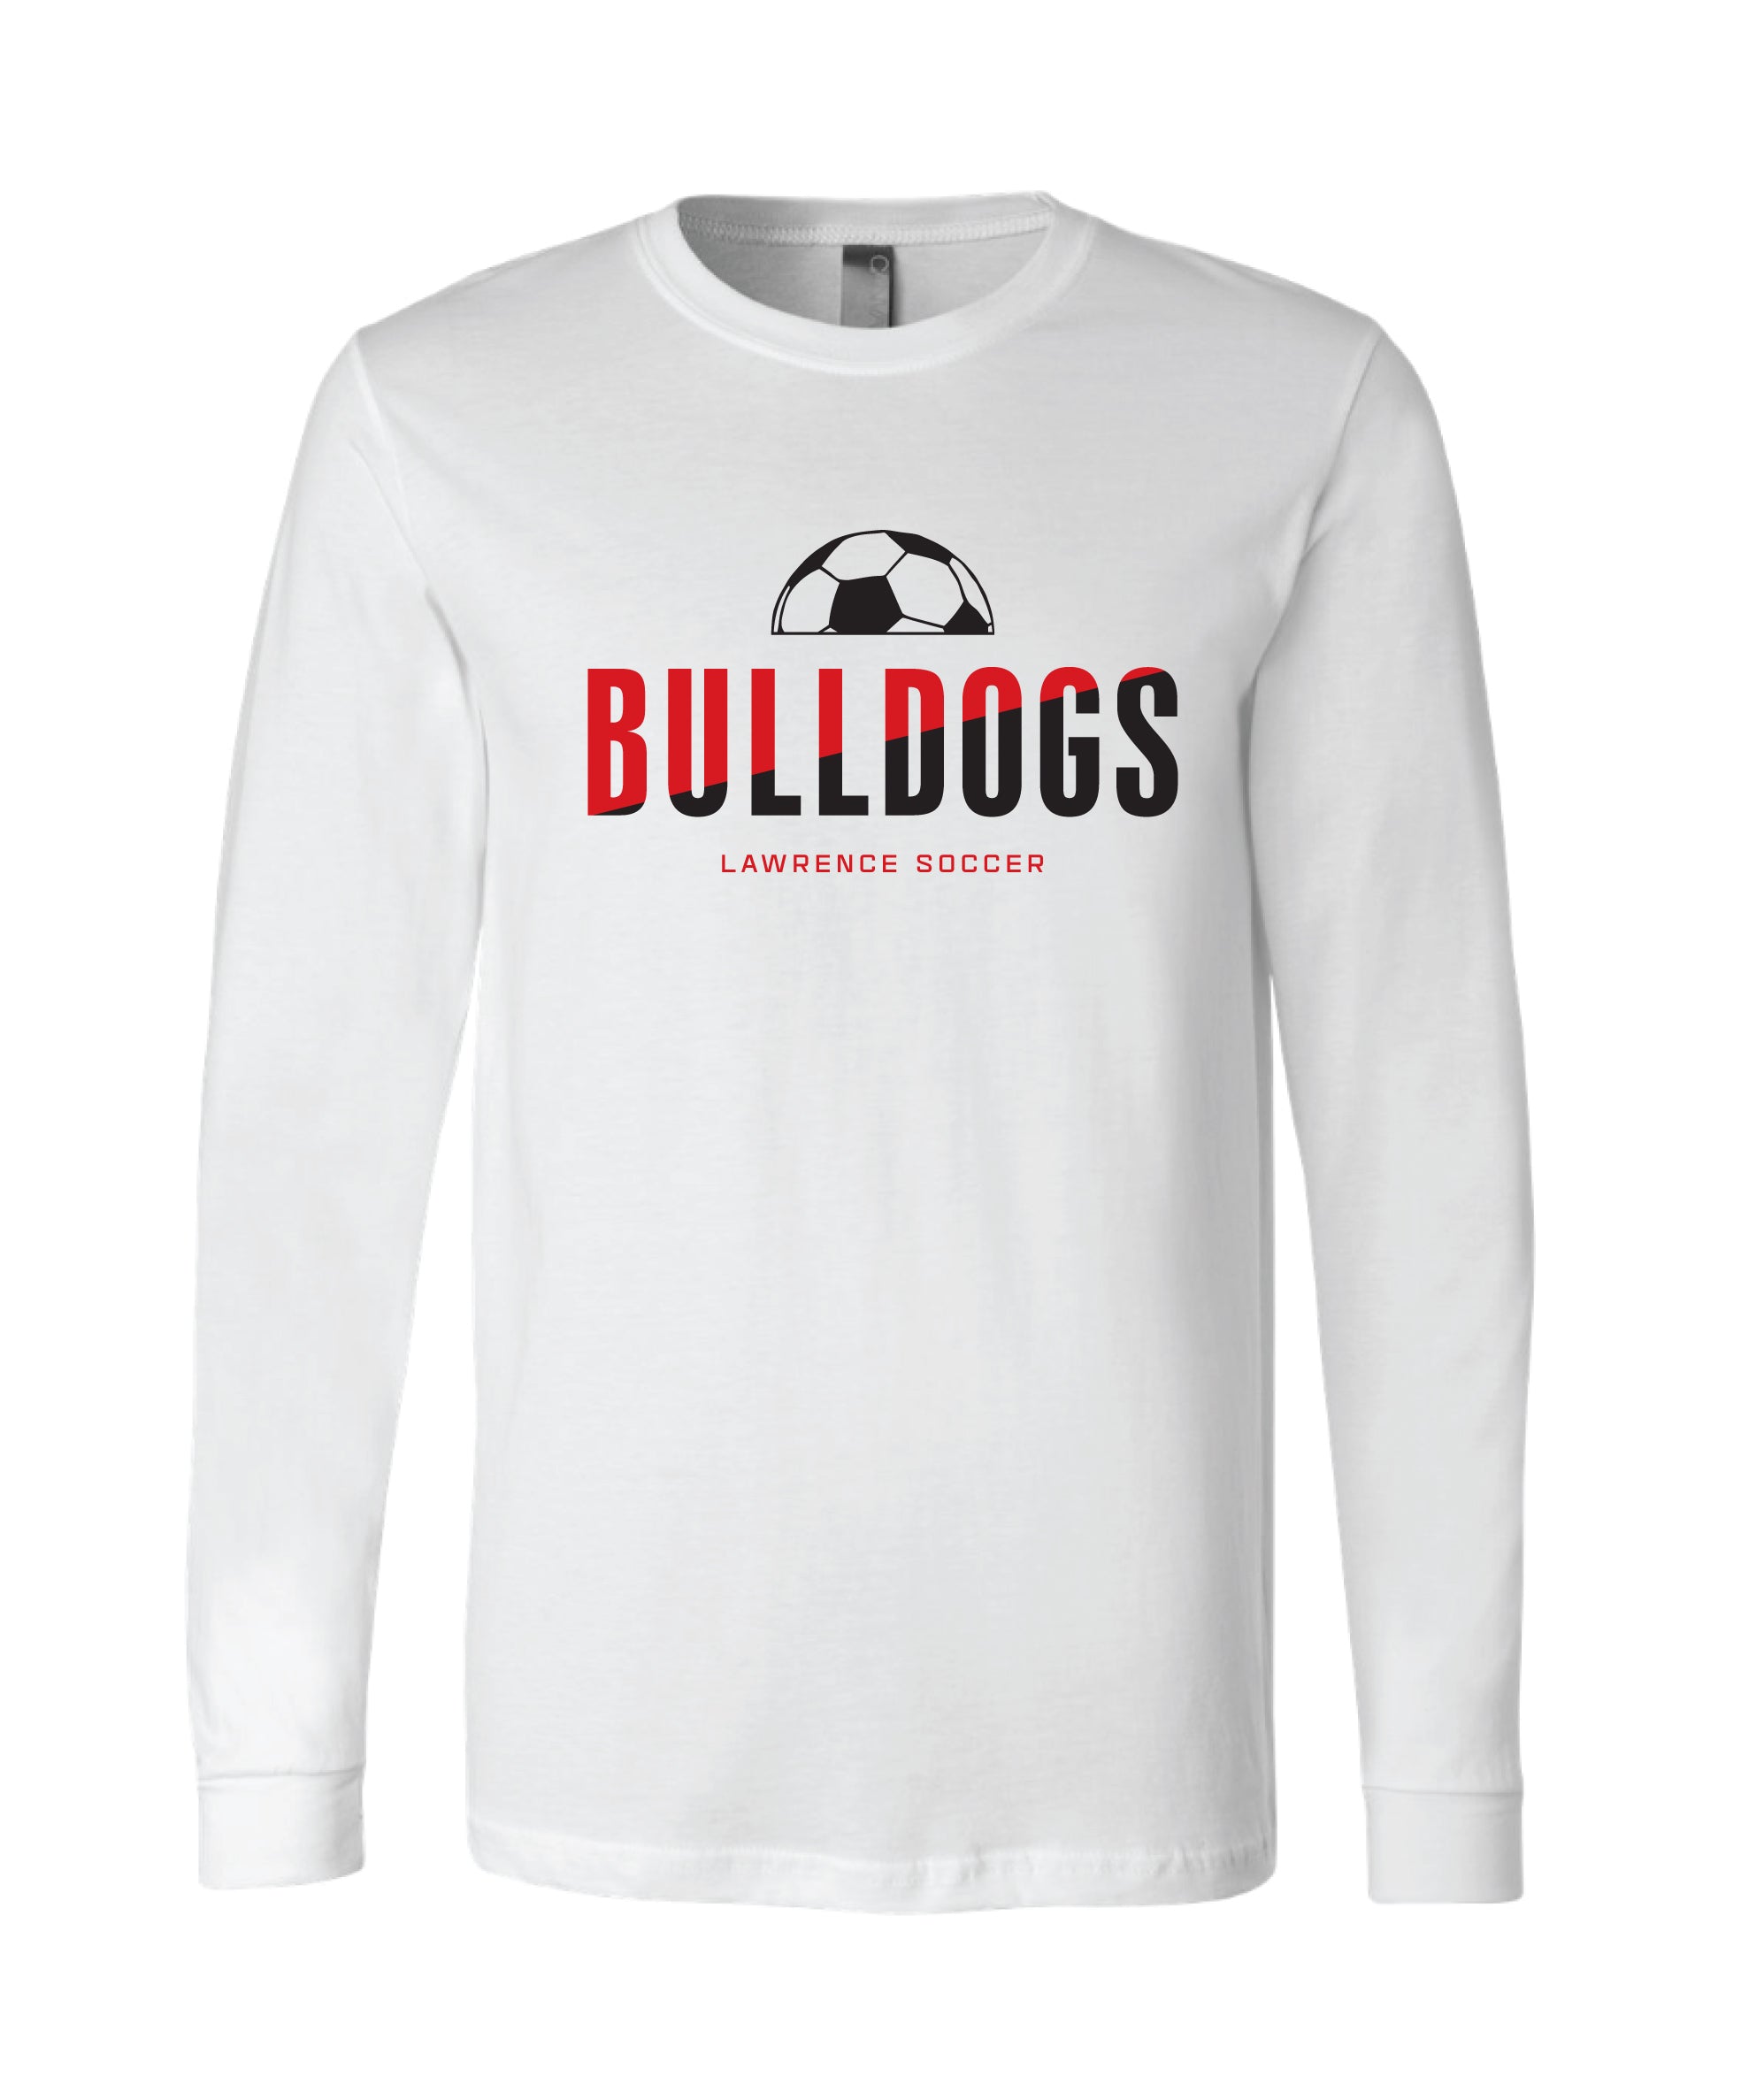 Bulldogs Long Sleeve White Shirt - Adult and Youth